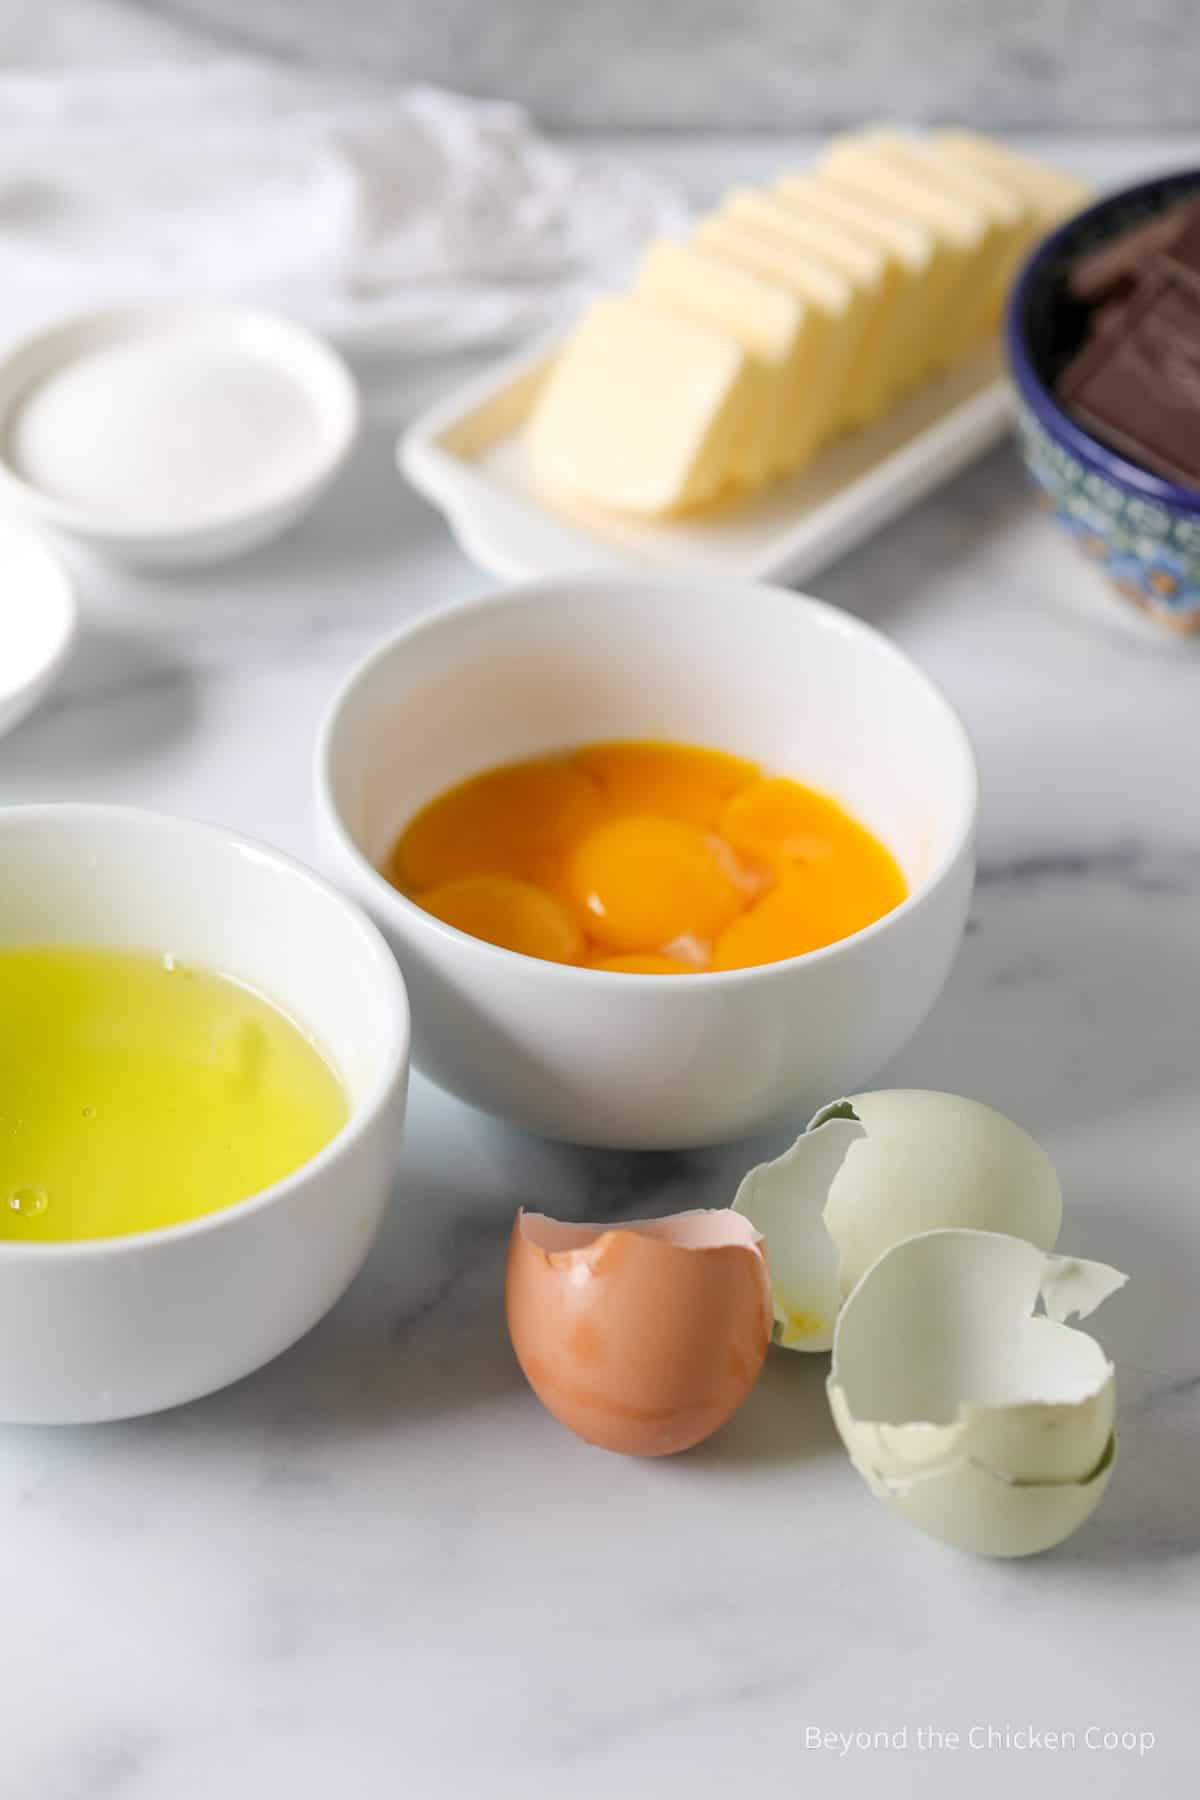 Separating eggs in bowls.